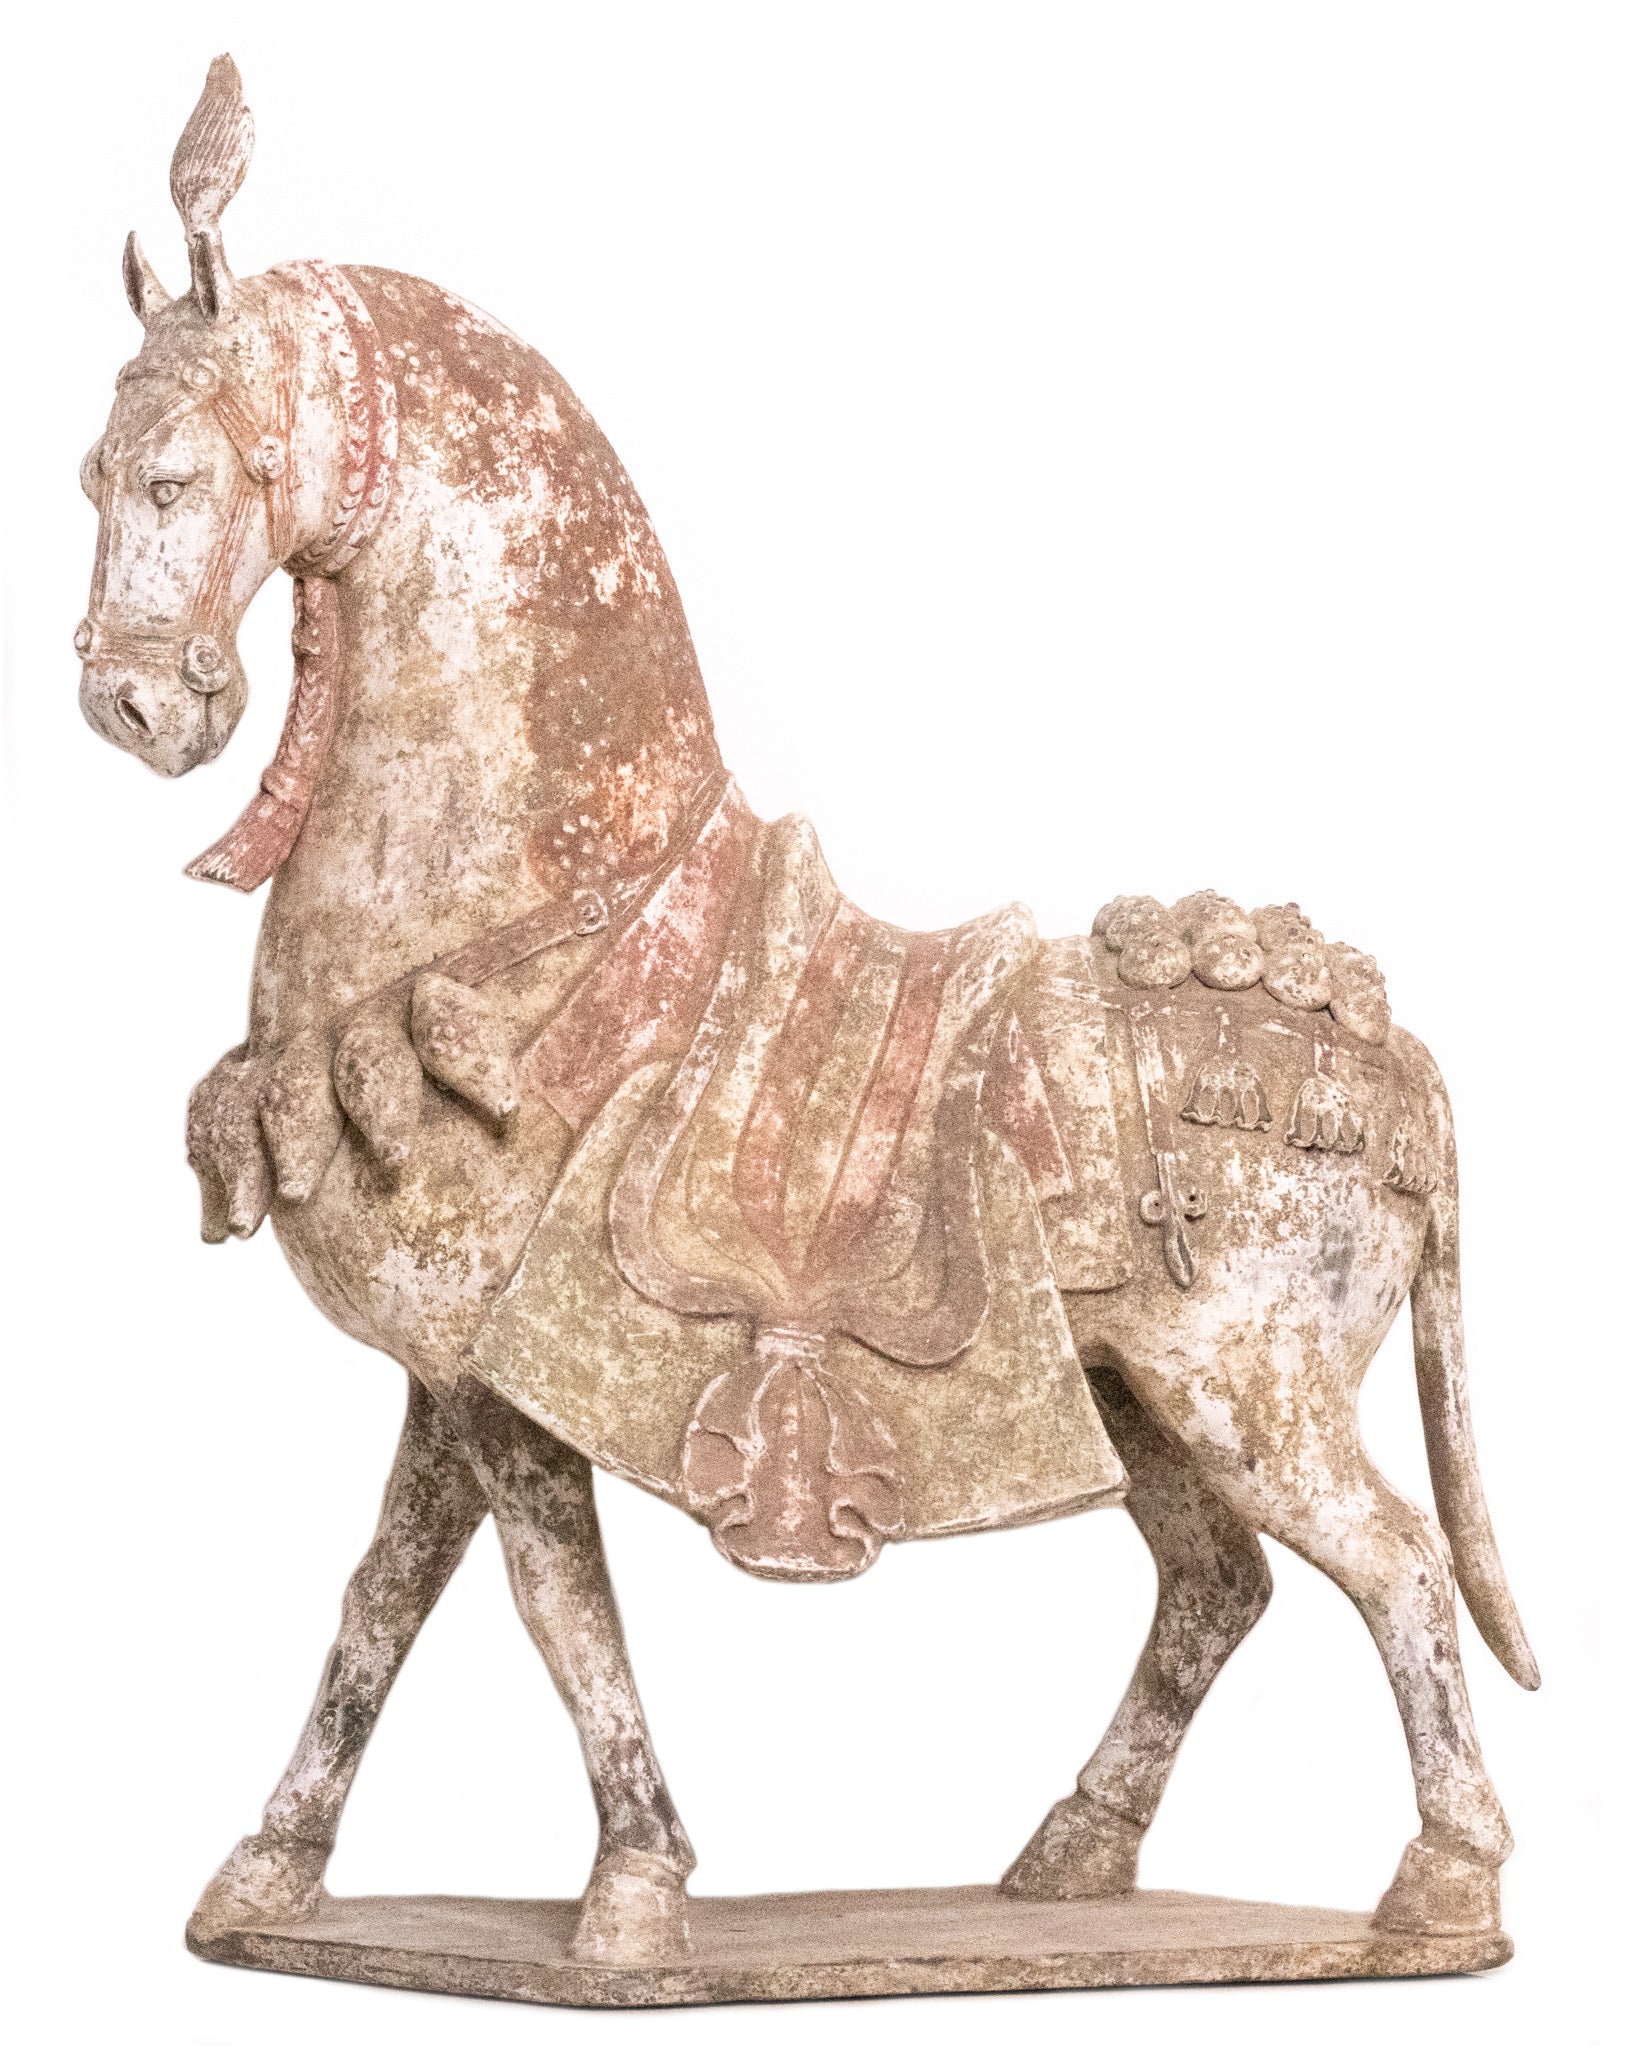 +China 549-577 AD Northern Qi Dynasty Ancient Caparisoned Horse In Earthenware Terracotta